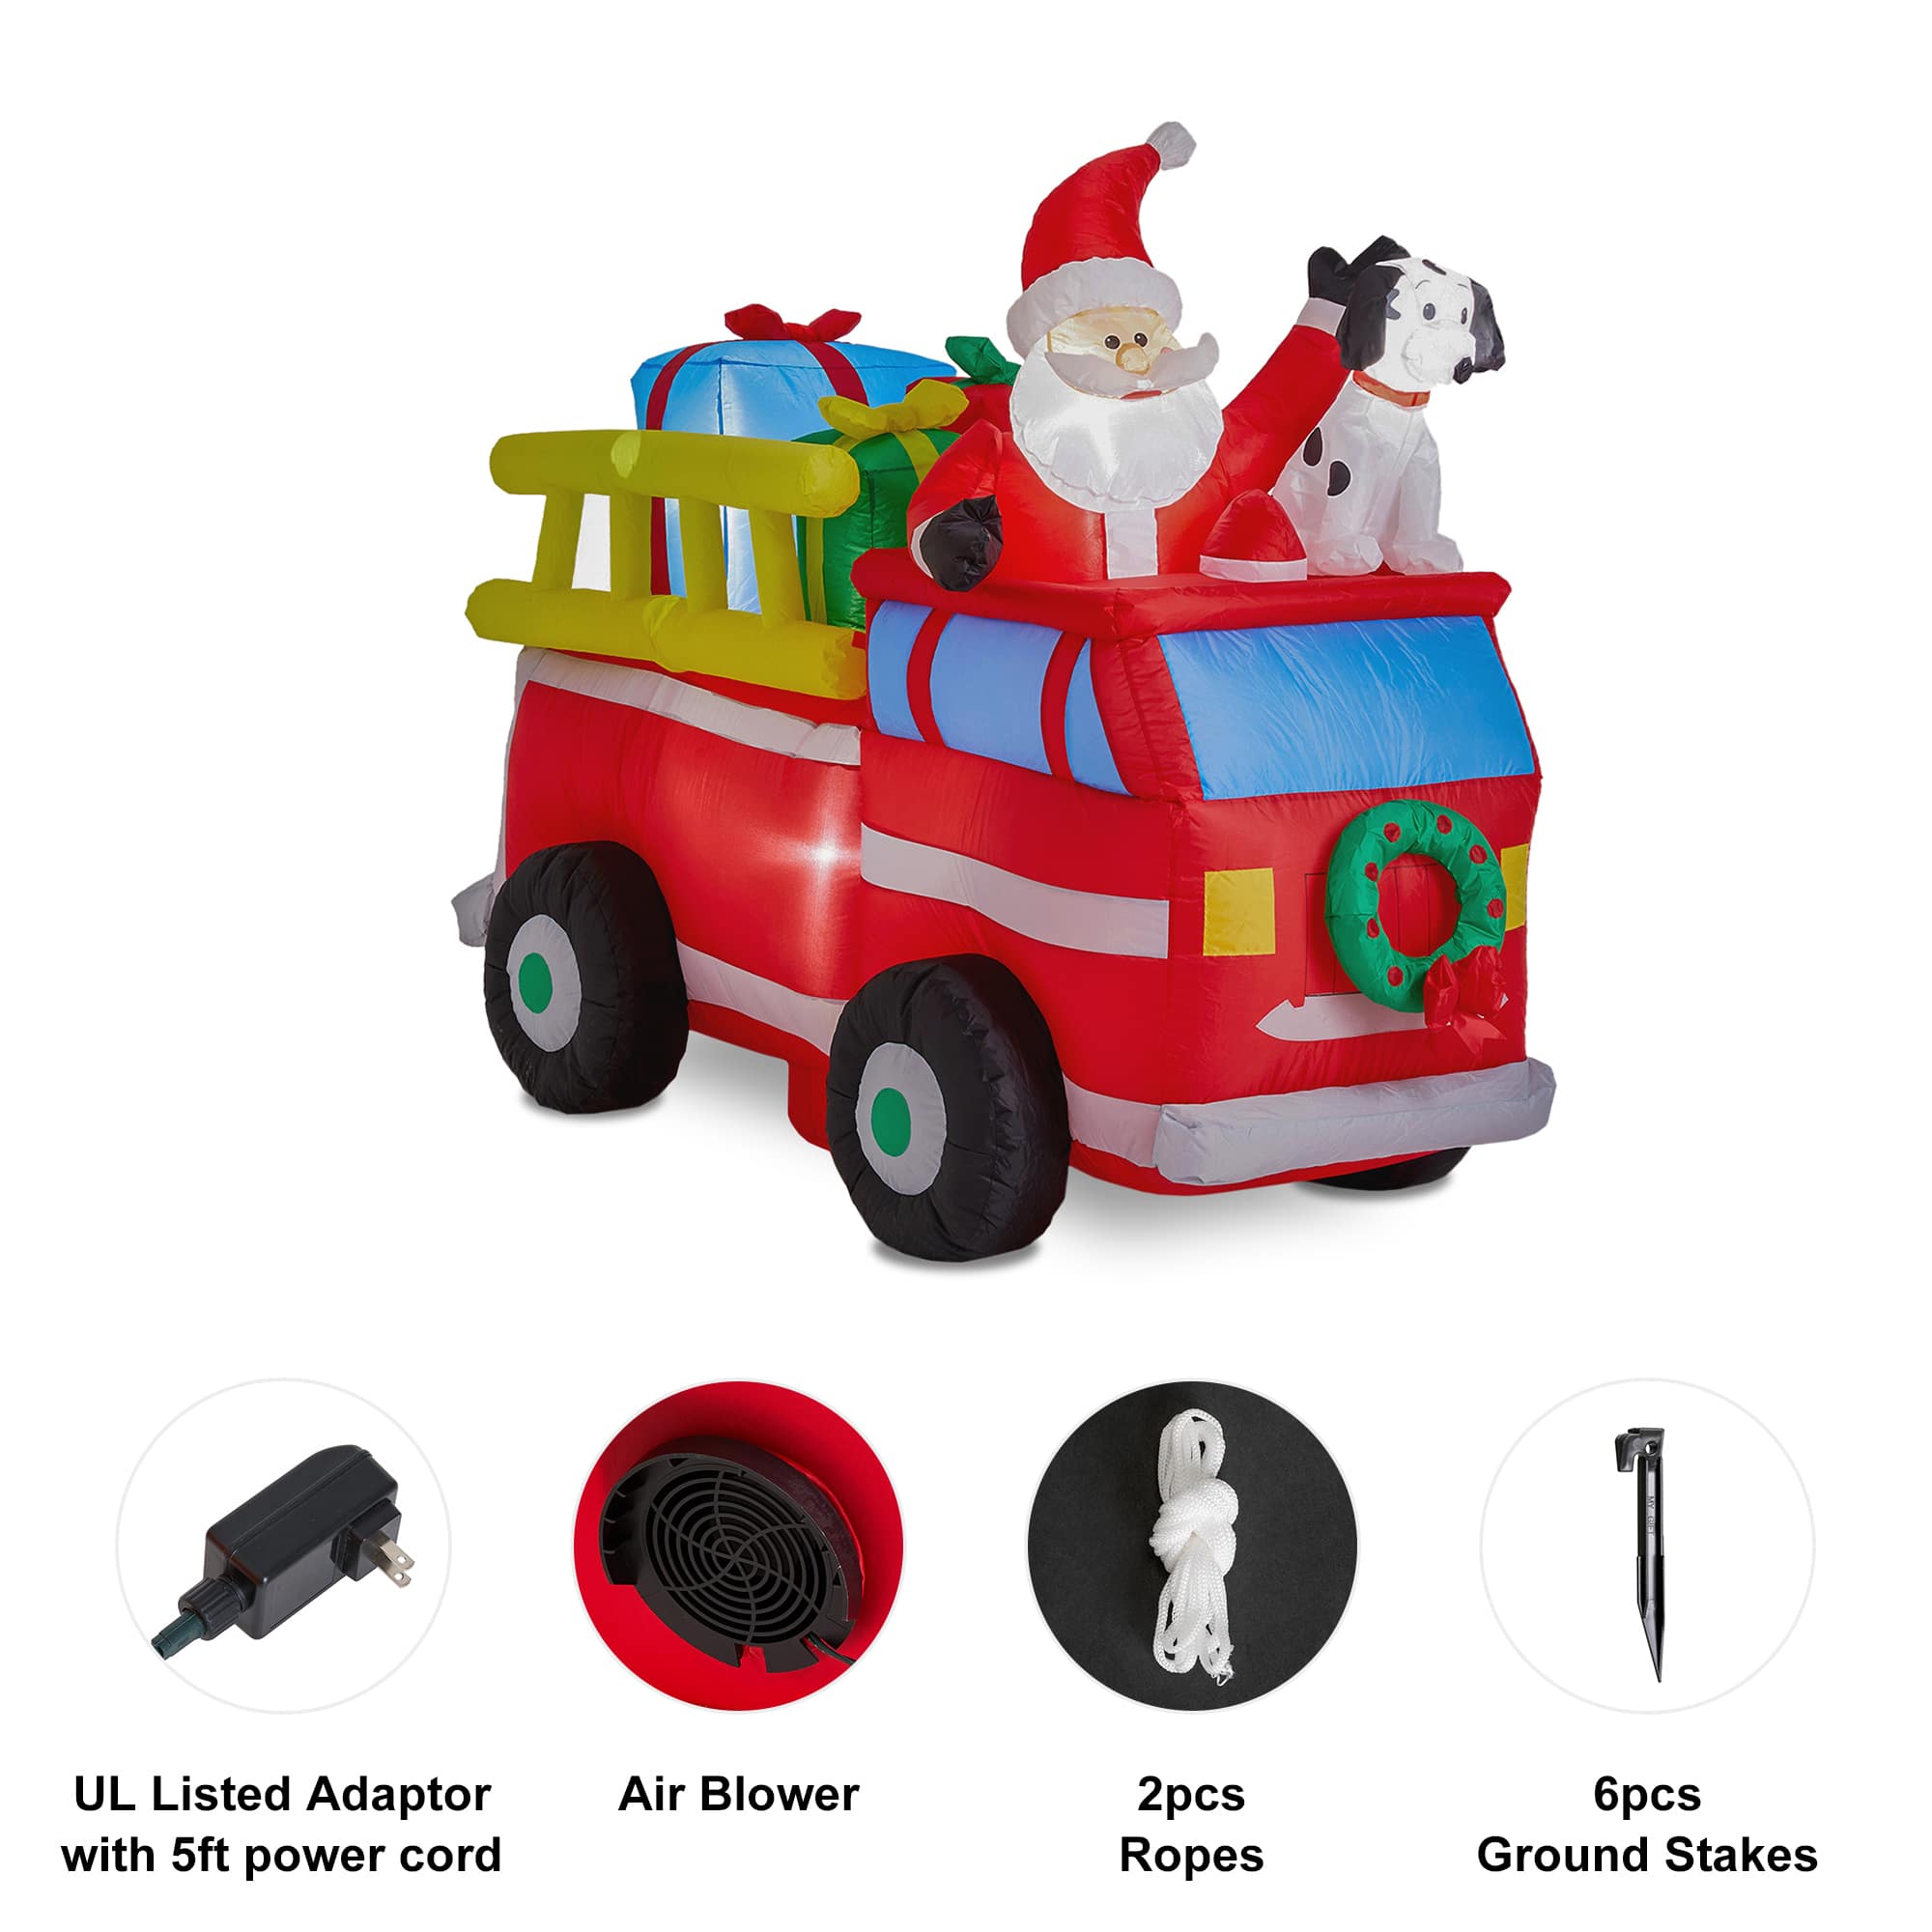 Glitzhome&#xAE; 7ft. Inflatable Santa in Truck With Lights